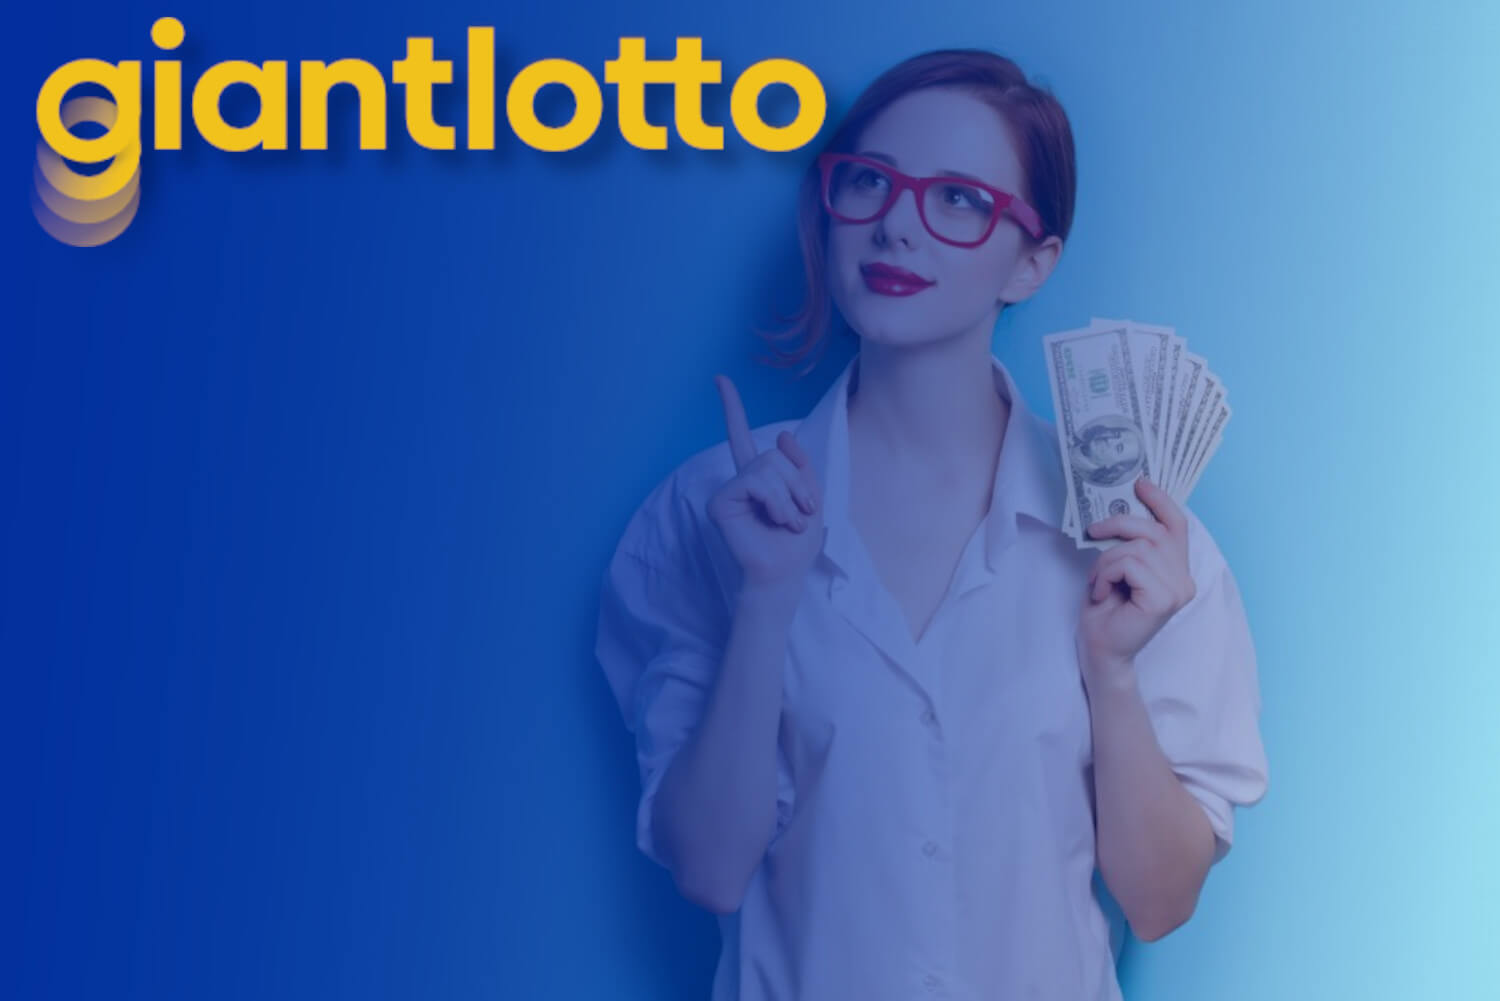 Frequently Asked Questions About Giant Lotto